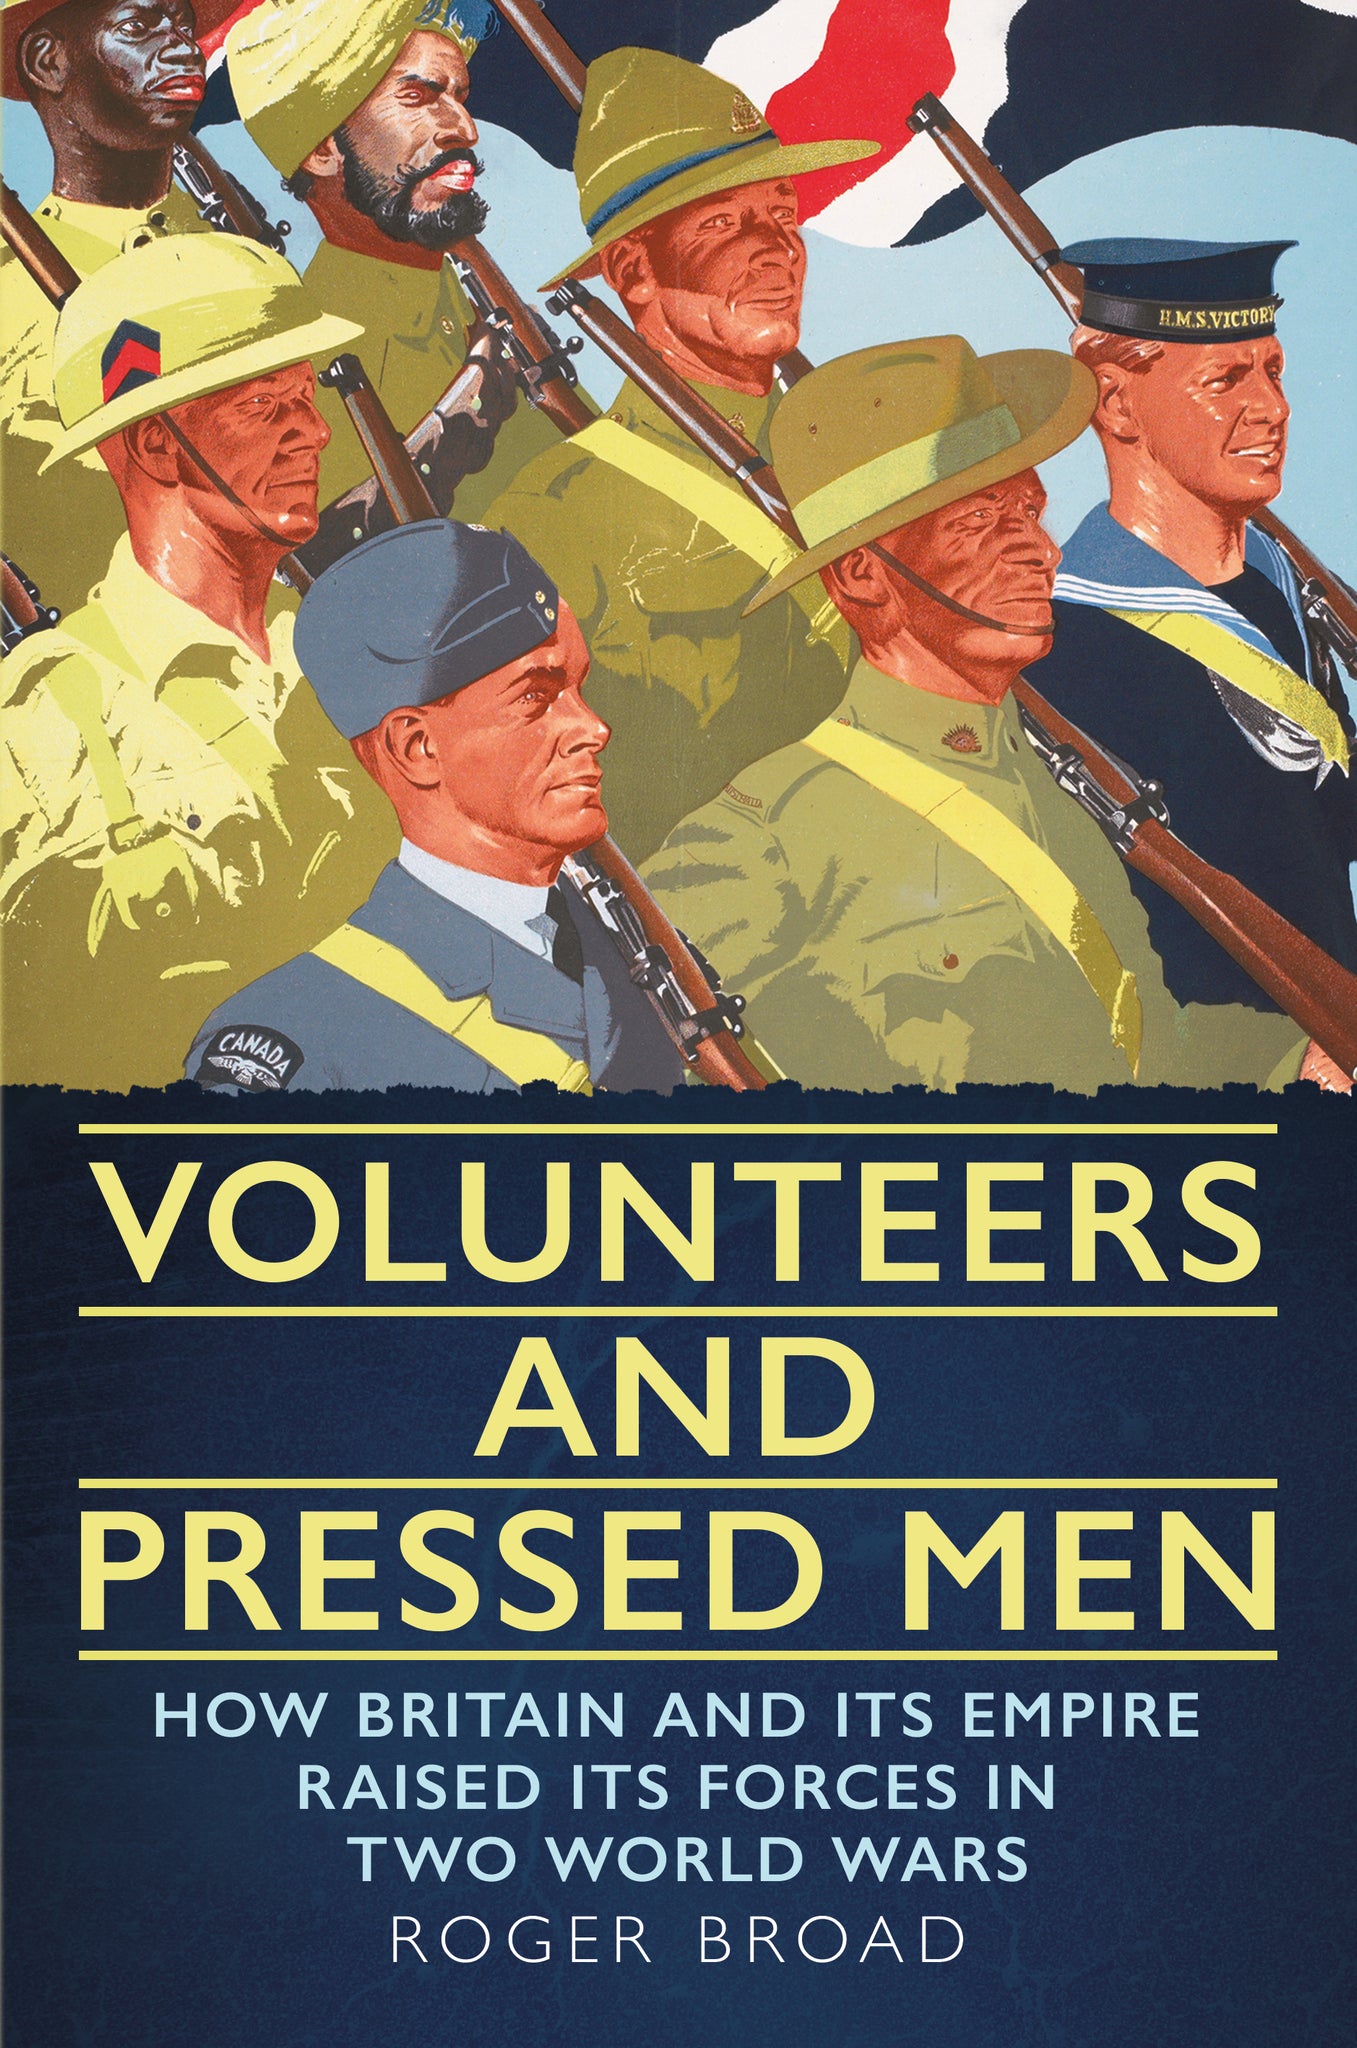 olunteers and Pressed Men - available now from Fonthill Media